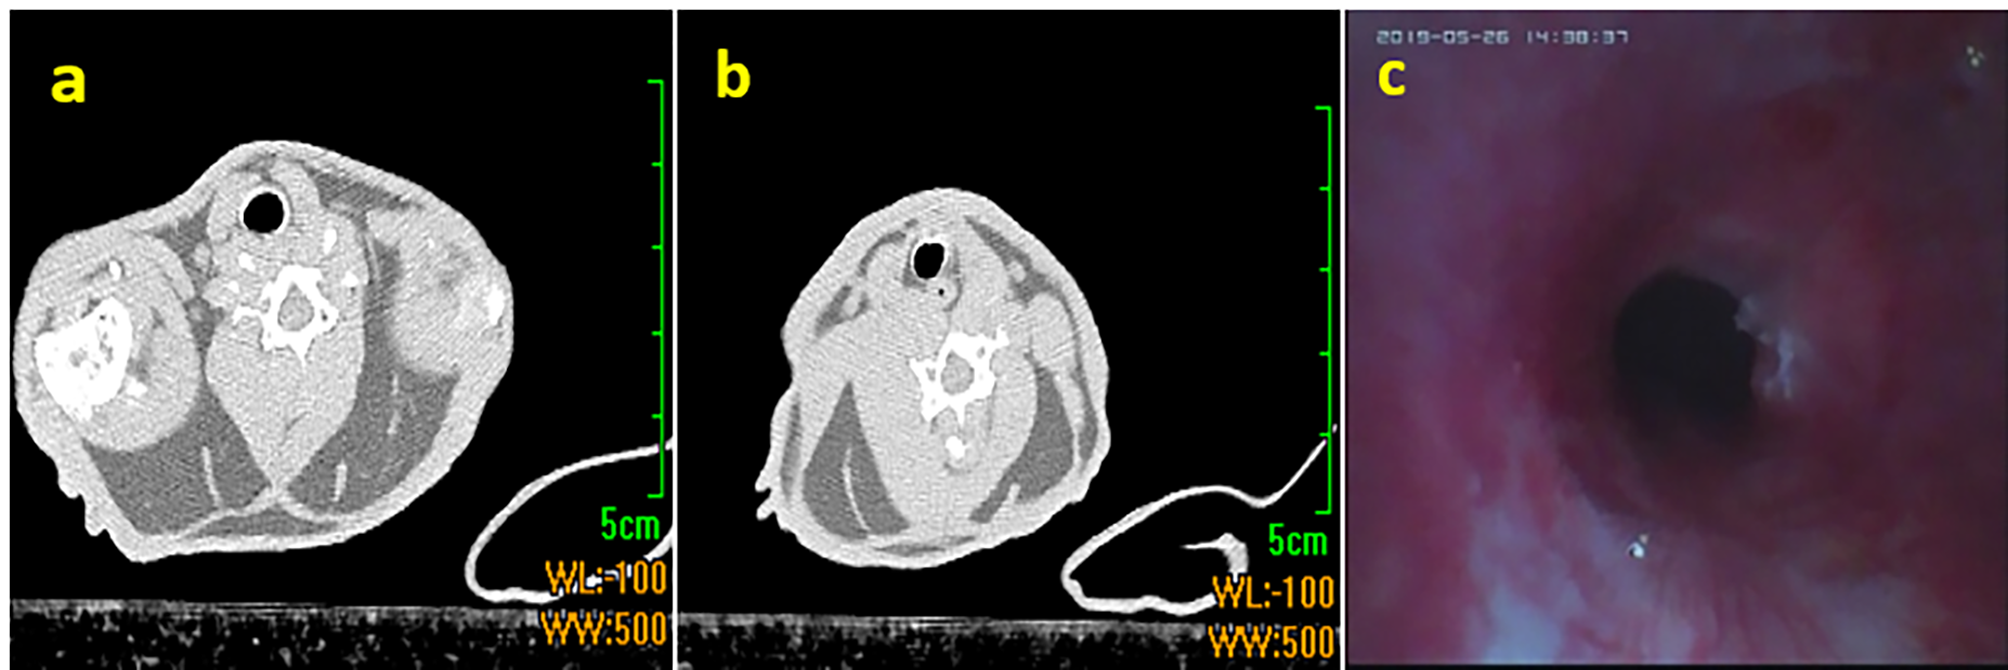 Study on the rationality of small diameter metallic airway stent in treatment of tracheal stenosis in injured rabbits